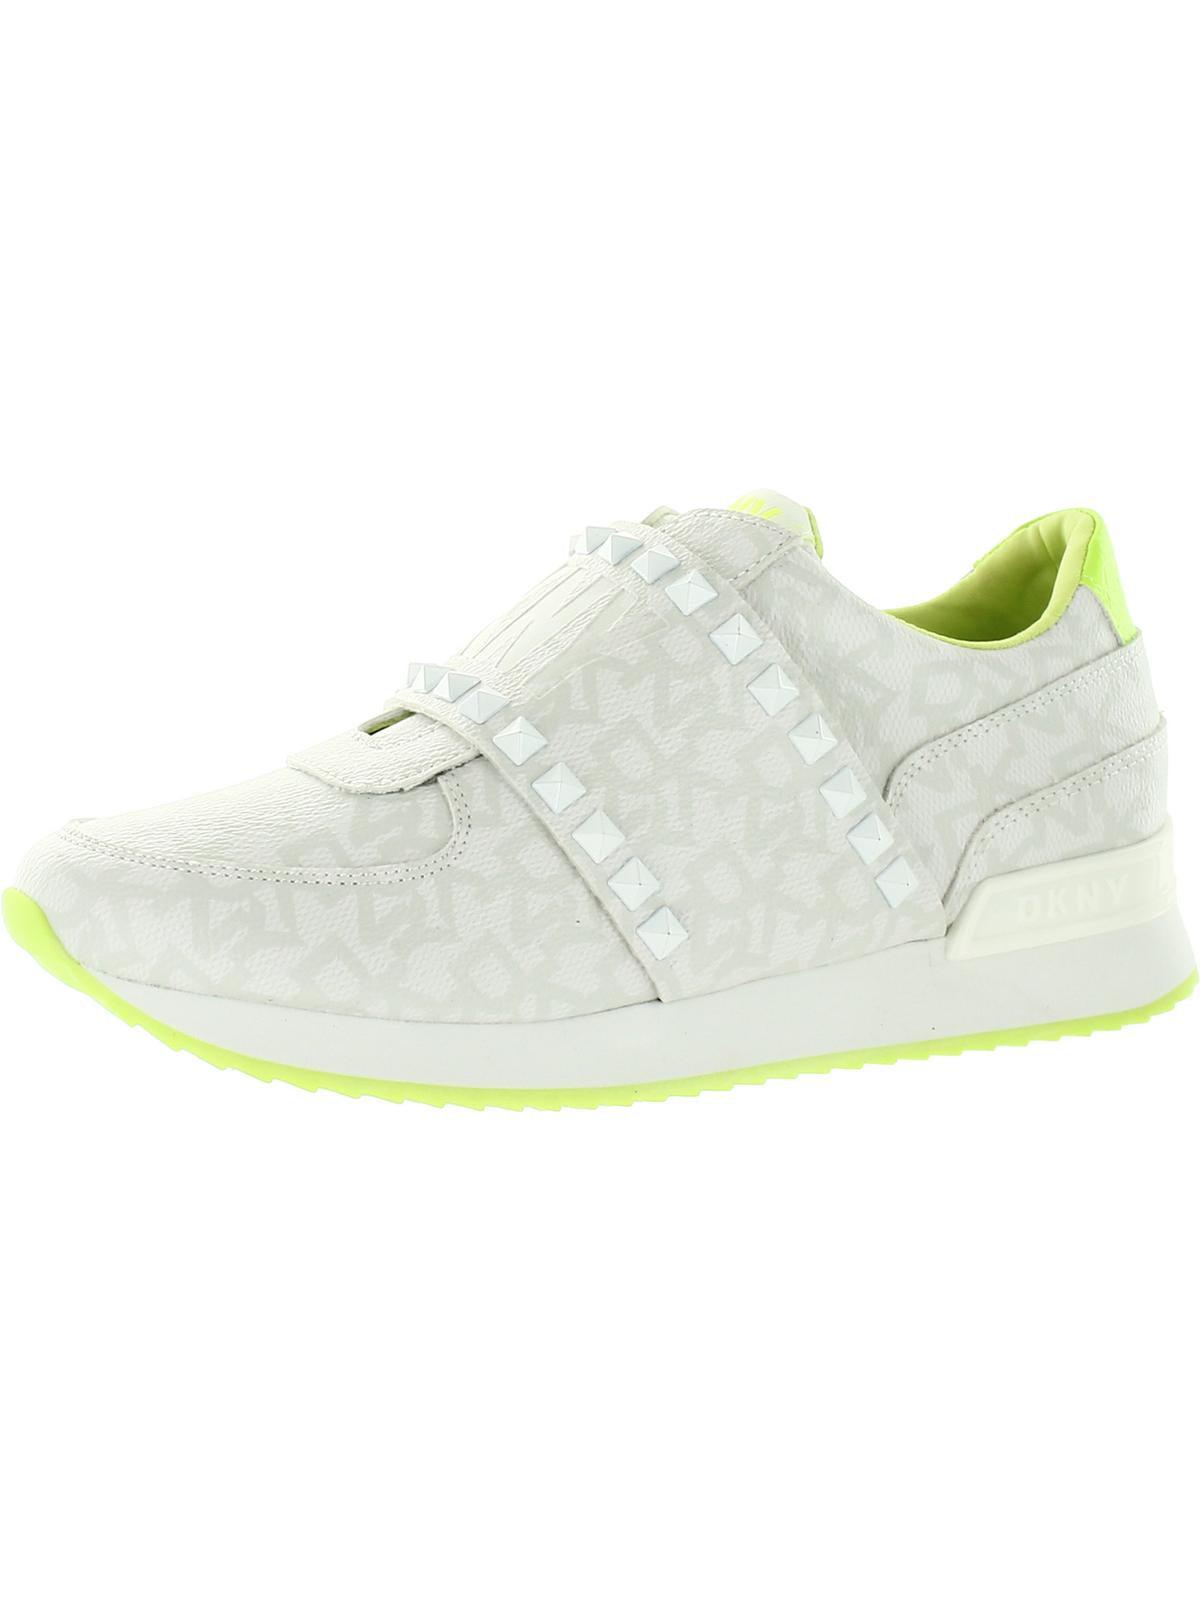 DKNY Marlin Studded Laceless Casual And Fashion Sneakers in White | Lyst